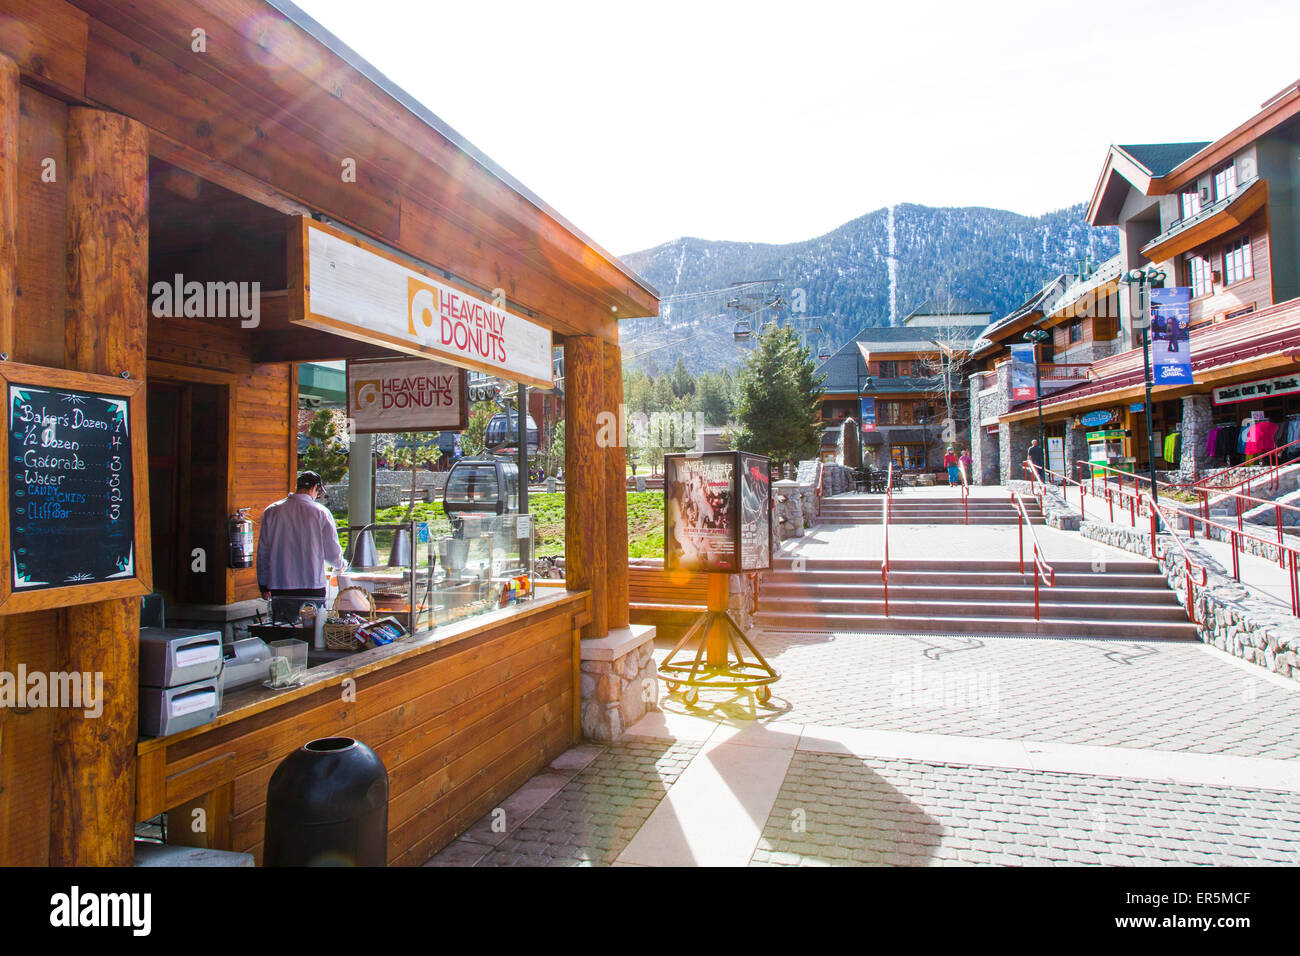 Stand de beignets, Heavenly ski area, South Lake Tahoe, California, USA Banque D'Images